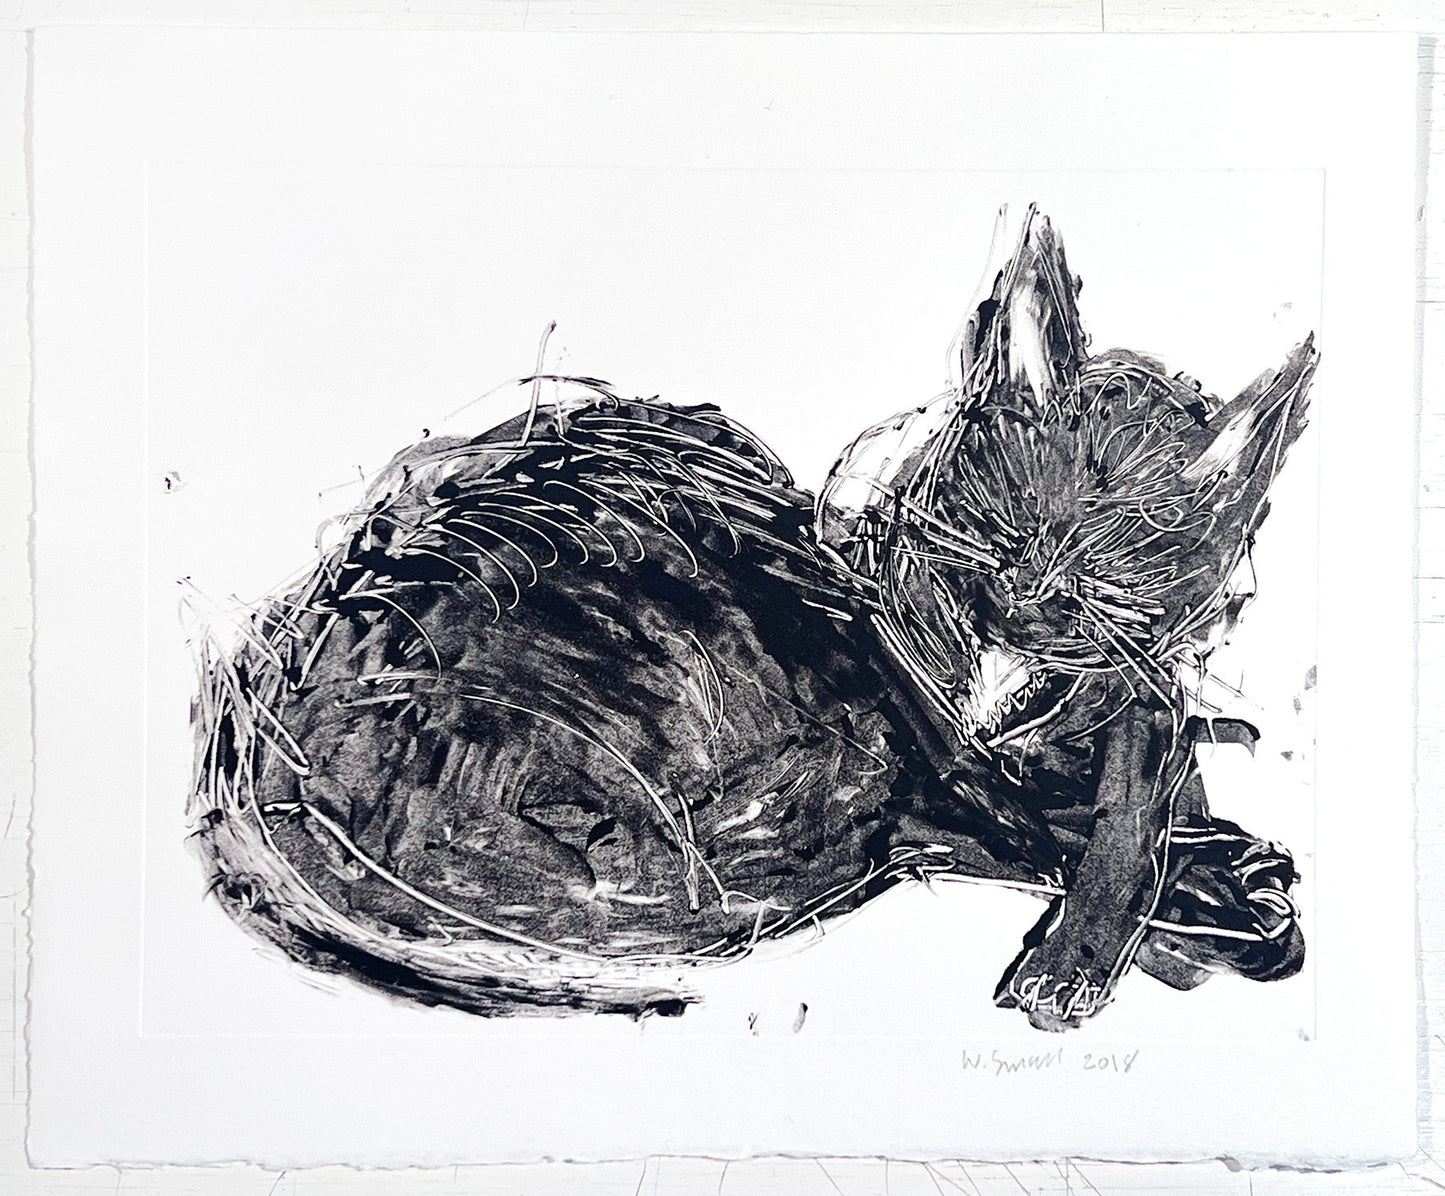 Wendy Small, Untitled, Monotype